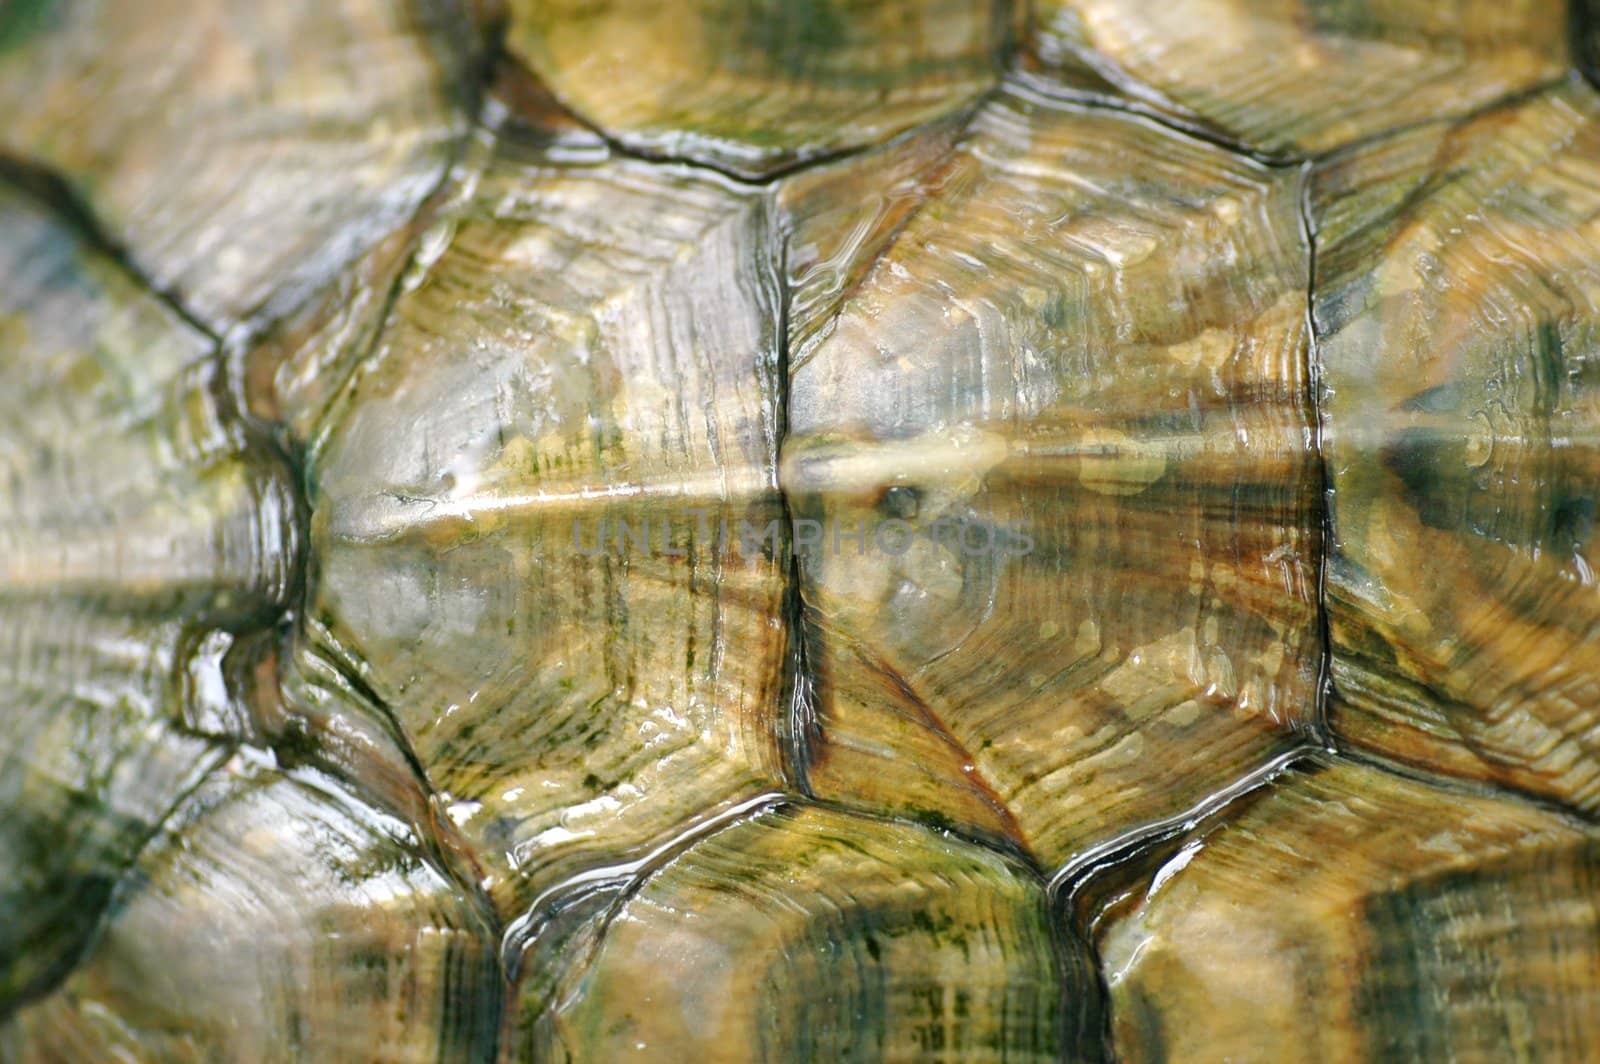 Texture of Tortoise Shell by khwi